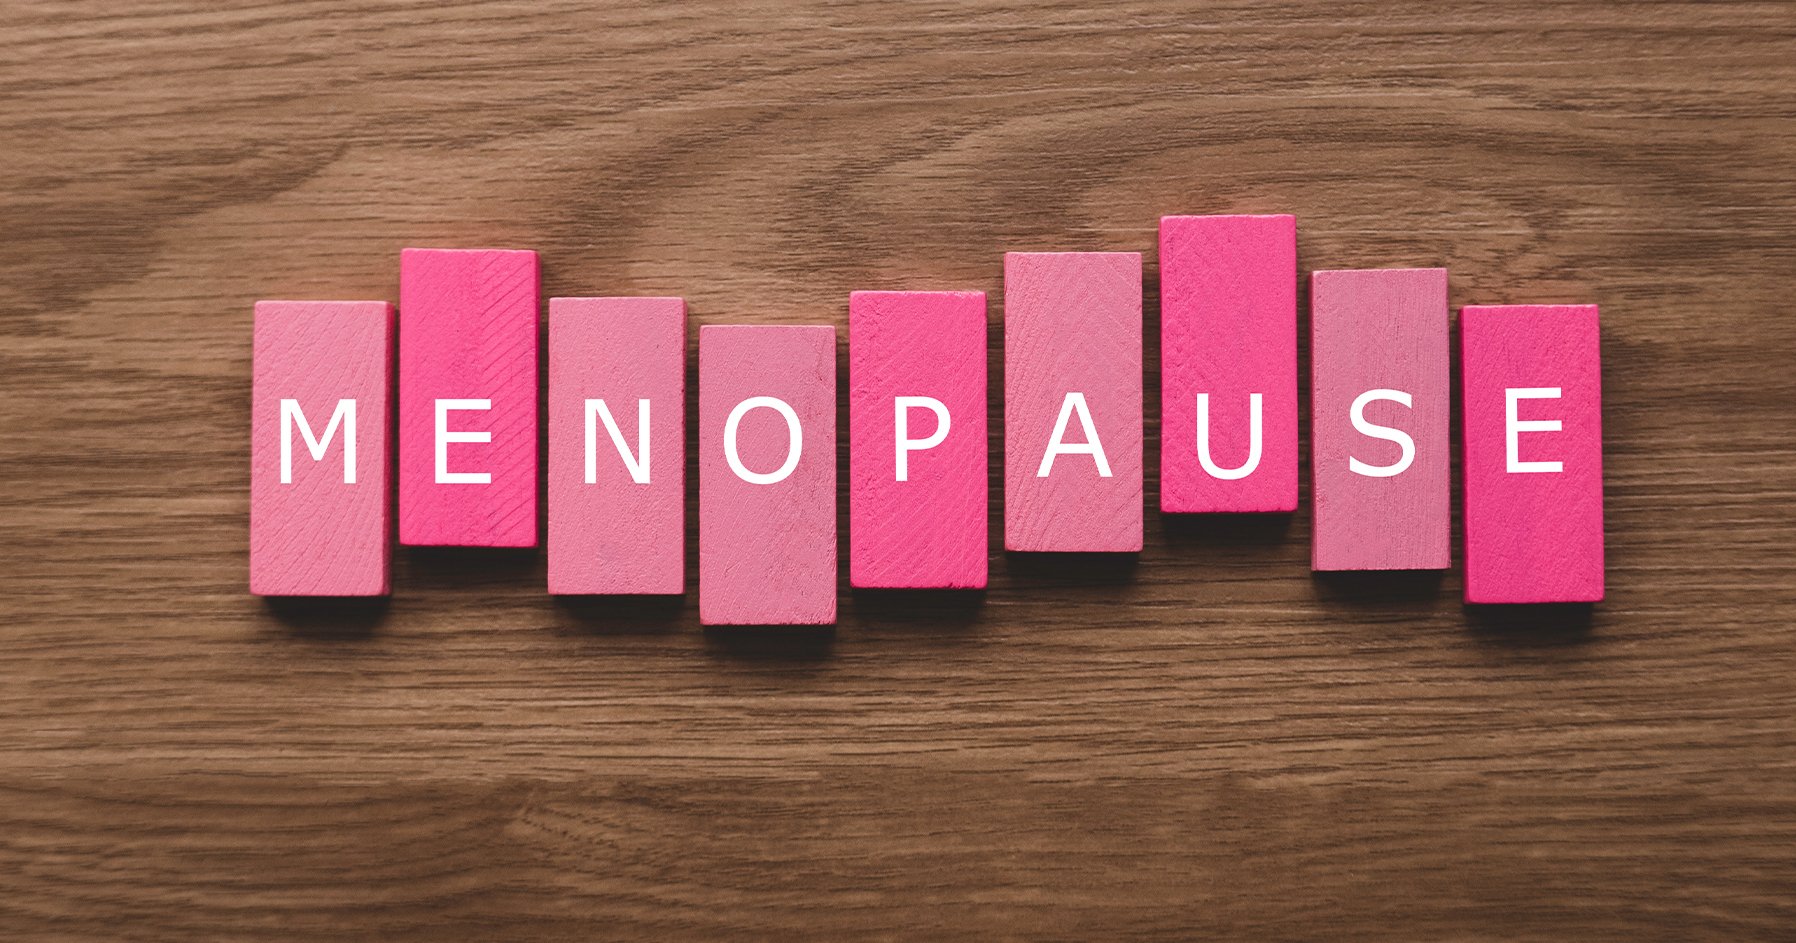 What are the Signs of Approaching the End of Menopause?